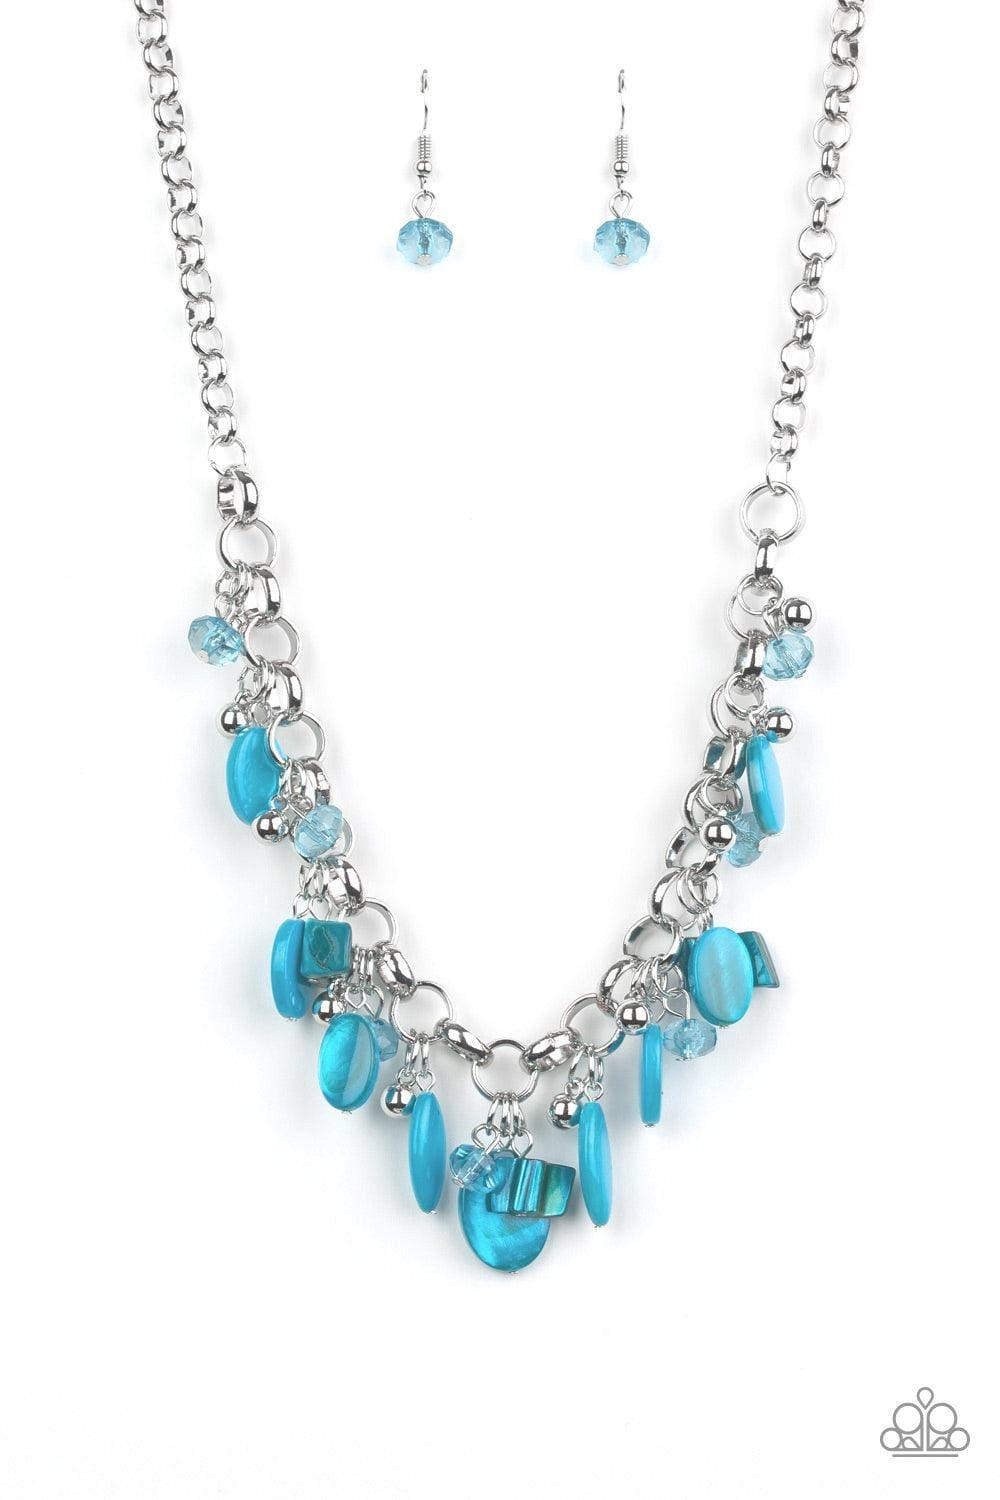 Paparazzi Accessories - I Want To Sea The World - Blue Necklace - Bling by JessieK